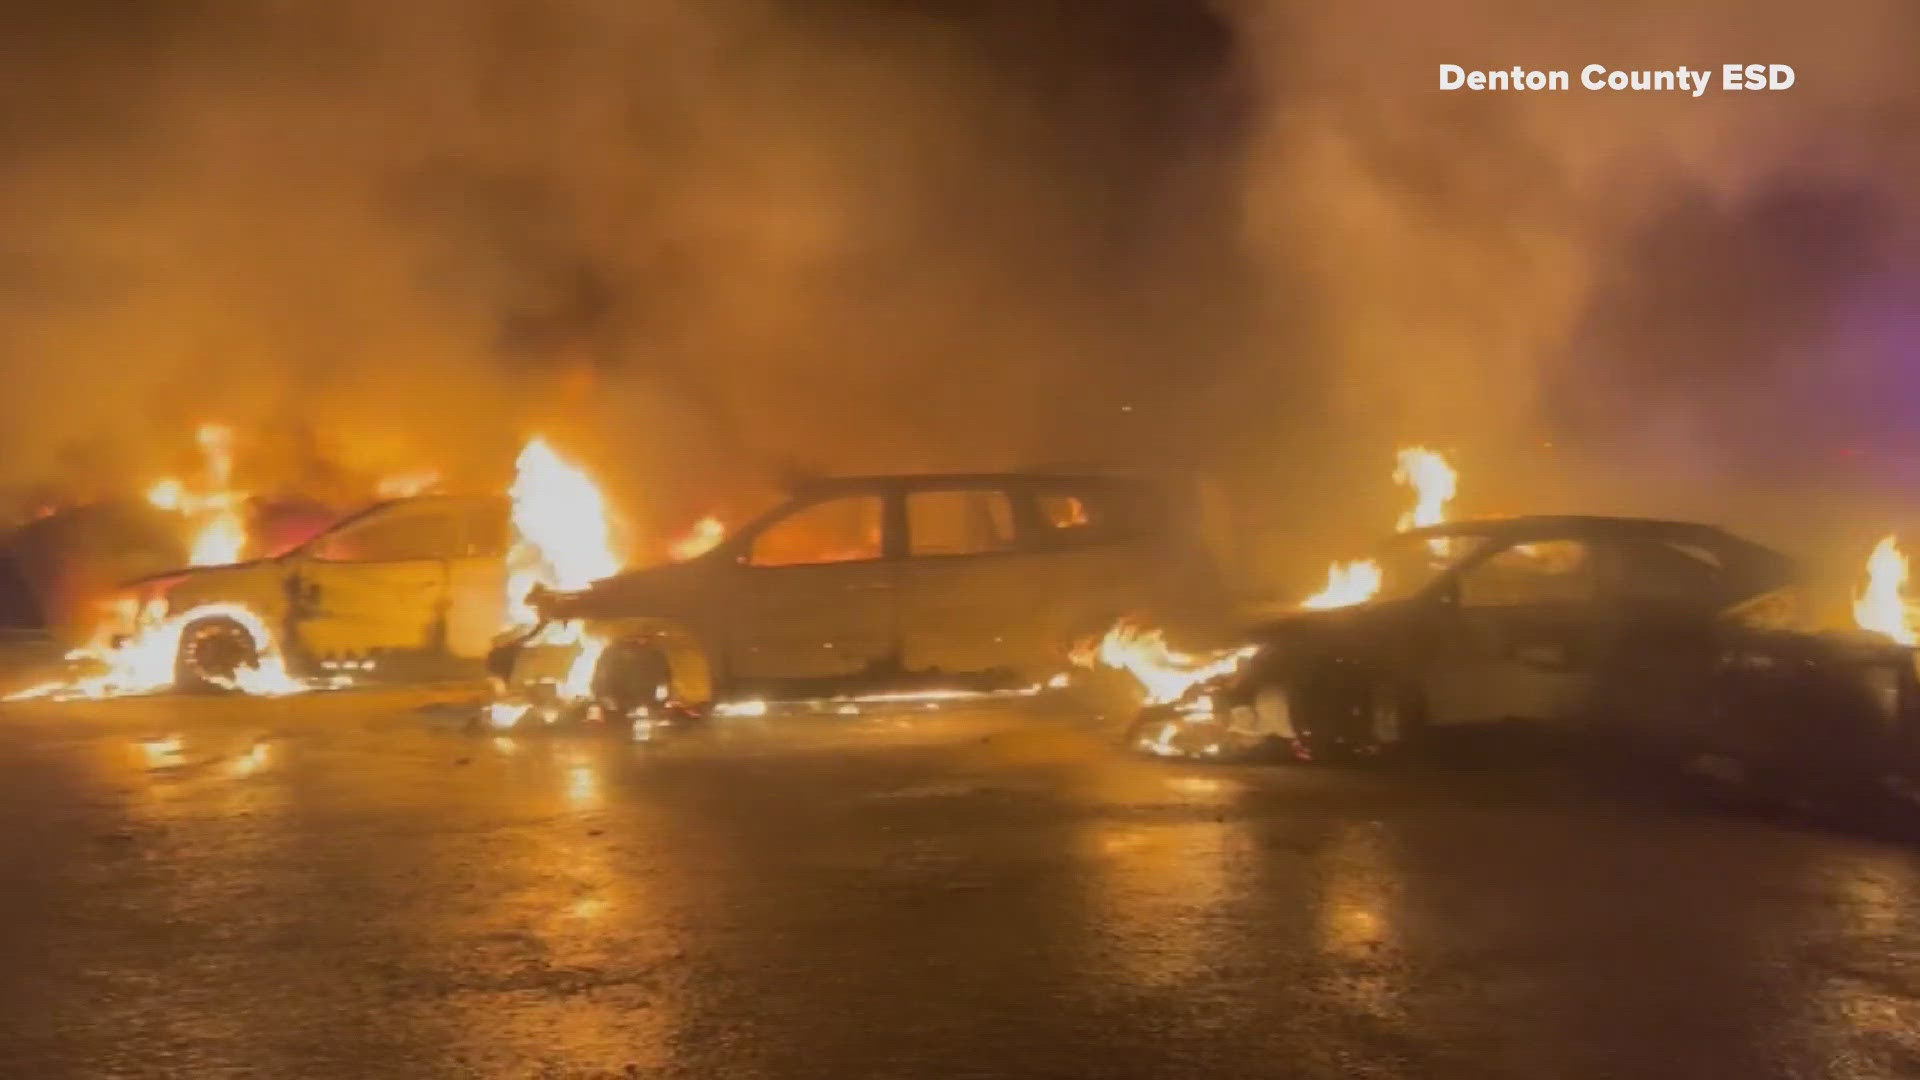 The fire started at a car lot in Denton County, the same lot experienced a fire that burned 58 cars of Christmas Eve.